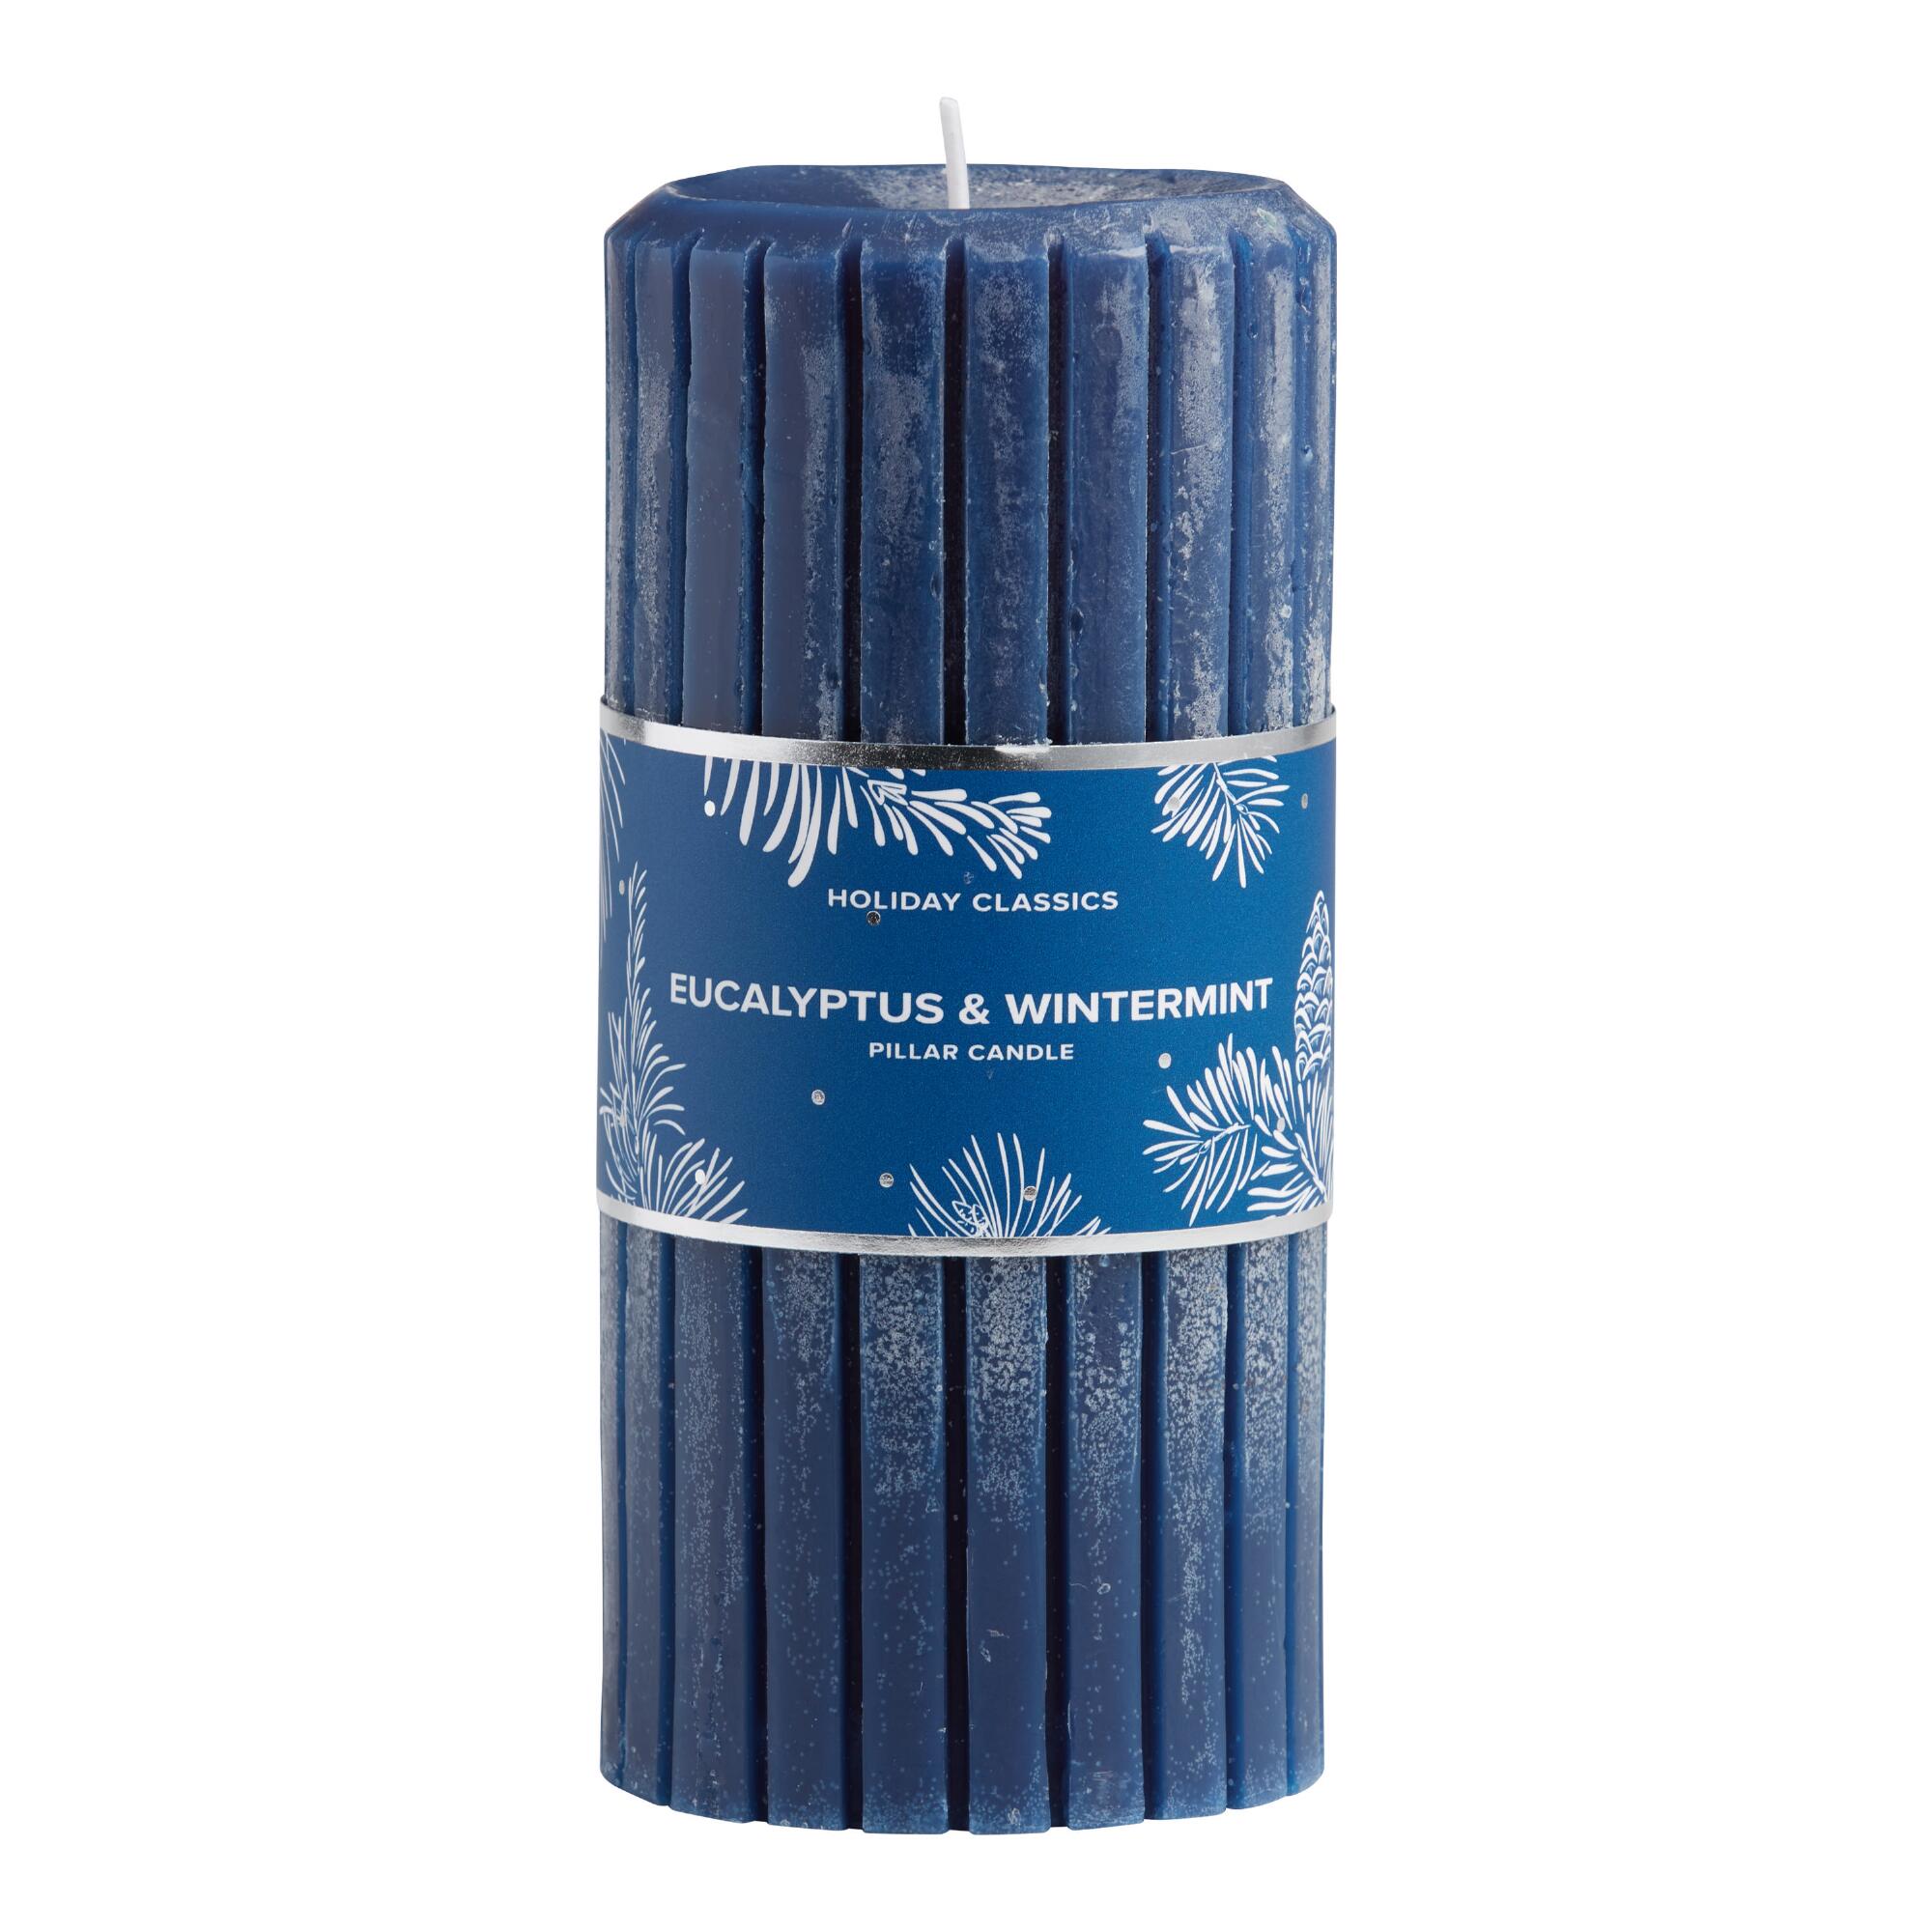 6 Inch Blue Eucalyptus & Wintermint Pillar Candle - Scented Wax by World Market